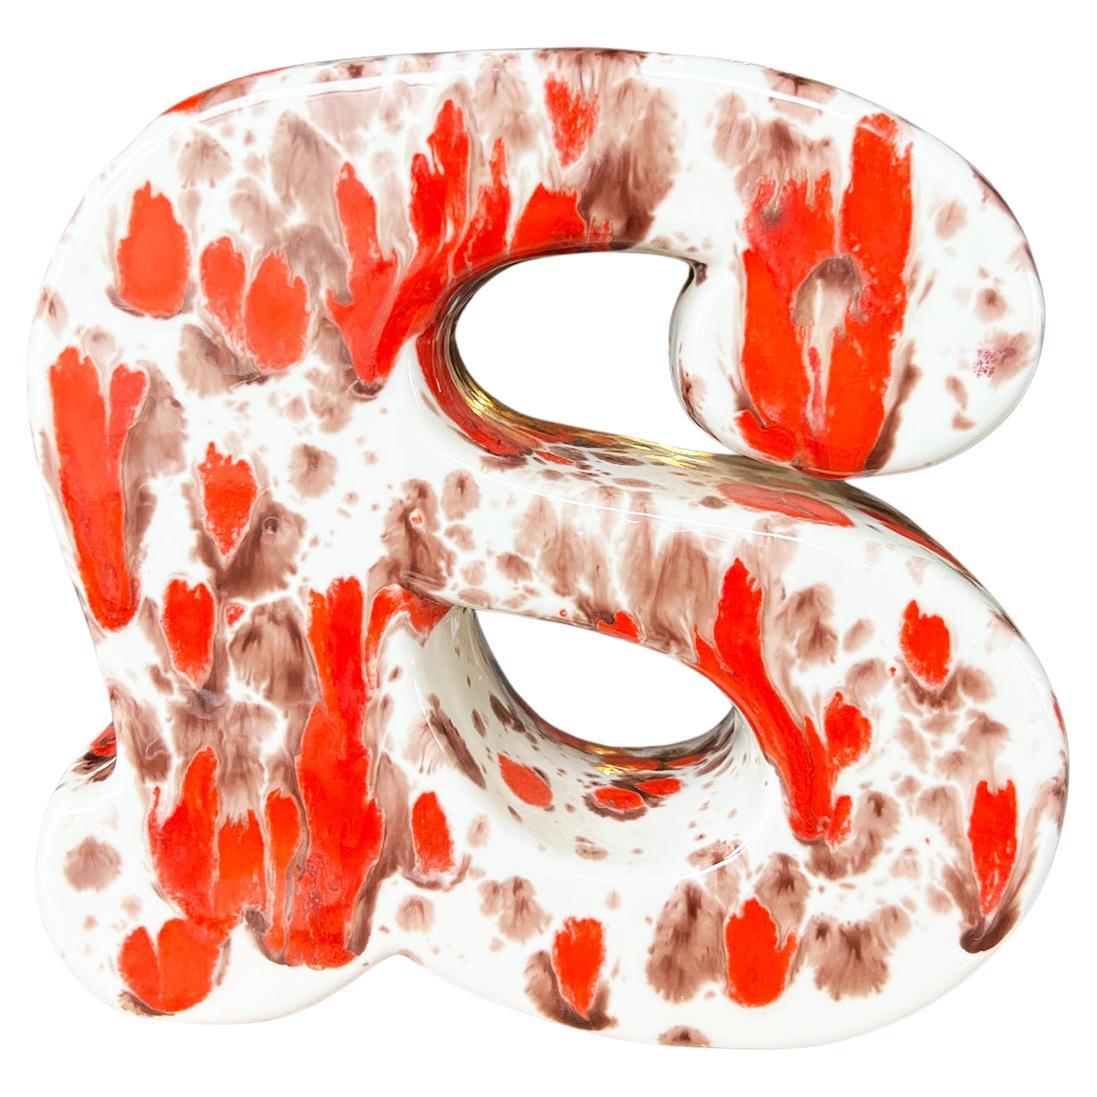 A ceramic lowercase letter A bookend. This piece was created in 1981 and painted in an orange, red, and brown splatter pattern. 

Dimensions:
6